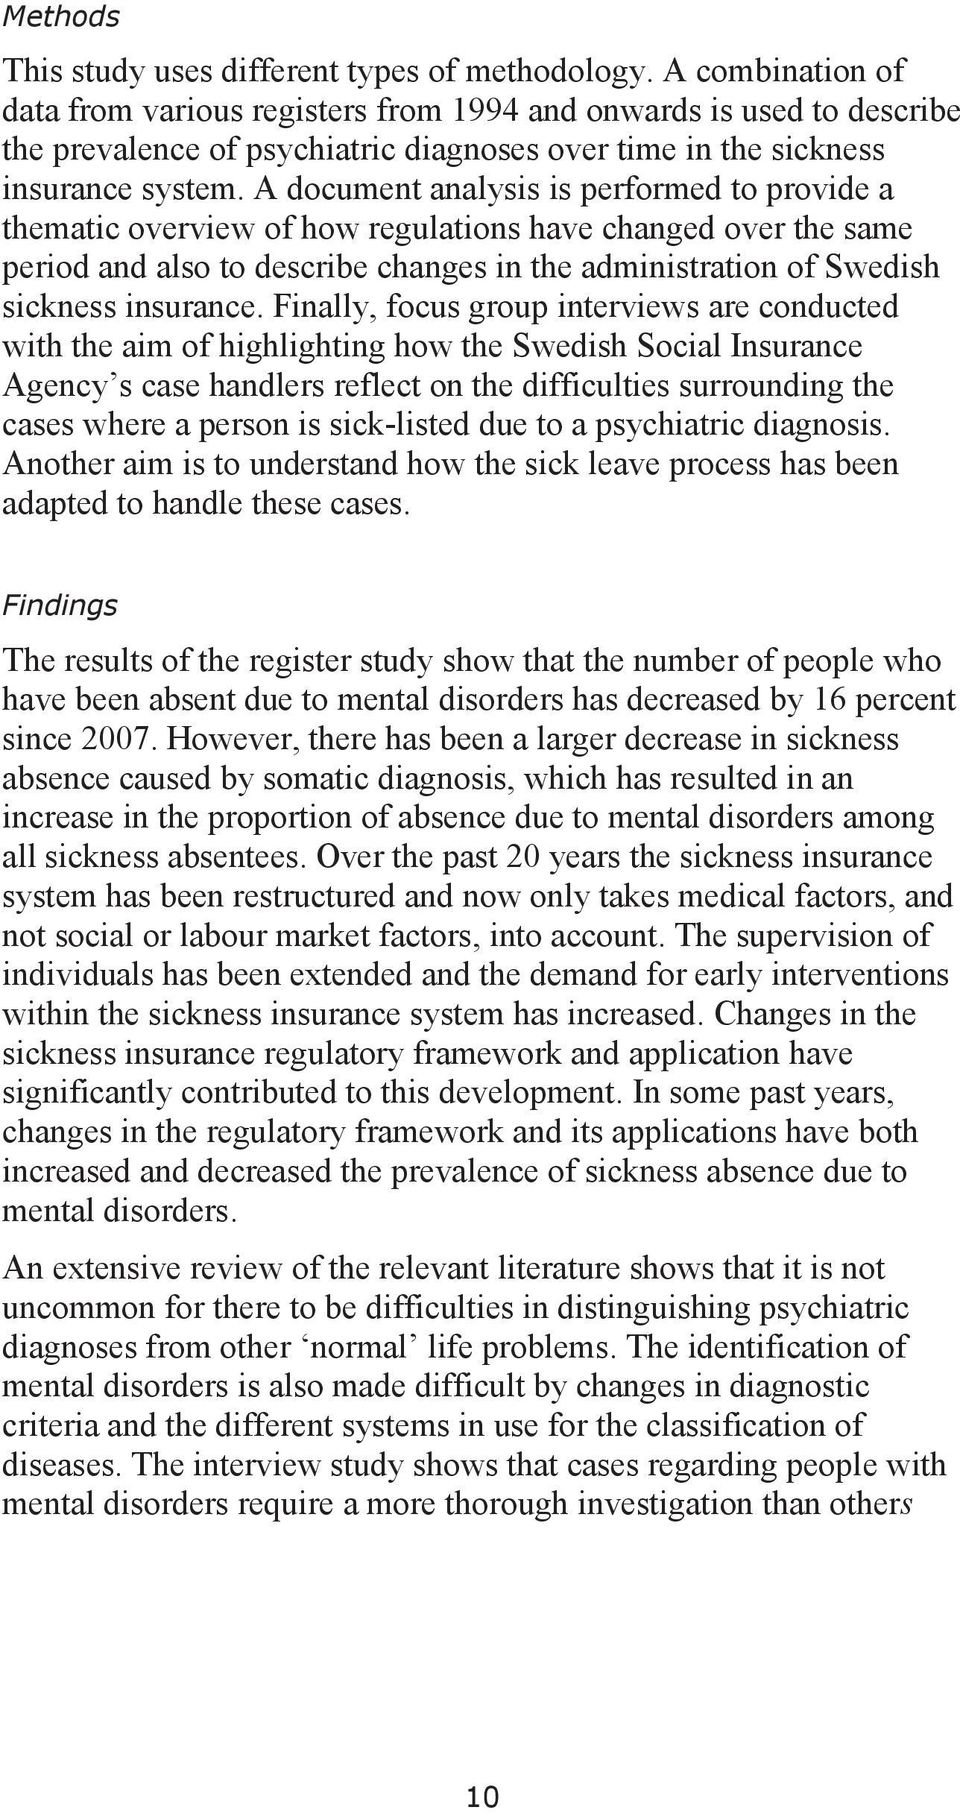 A document analysis is performed to provide a thematic overview of how regulations have changed over the same period and also to describe changes in the administration of Swedish sickness insurance.